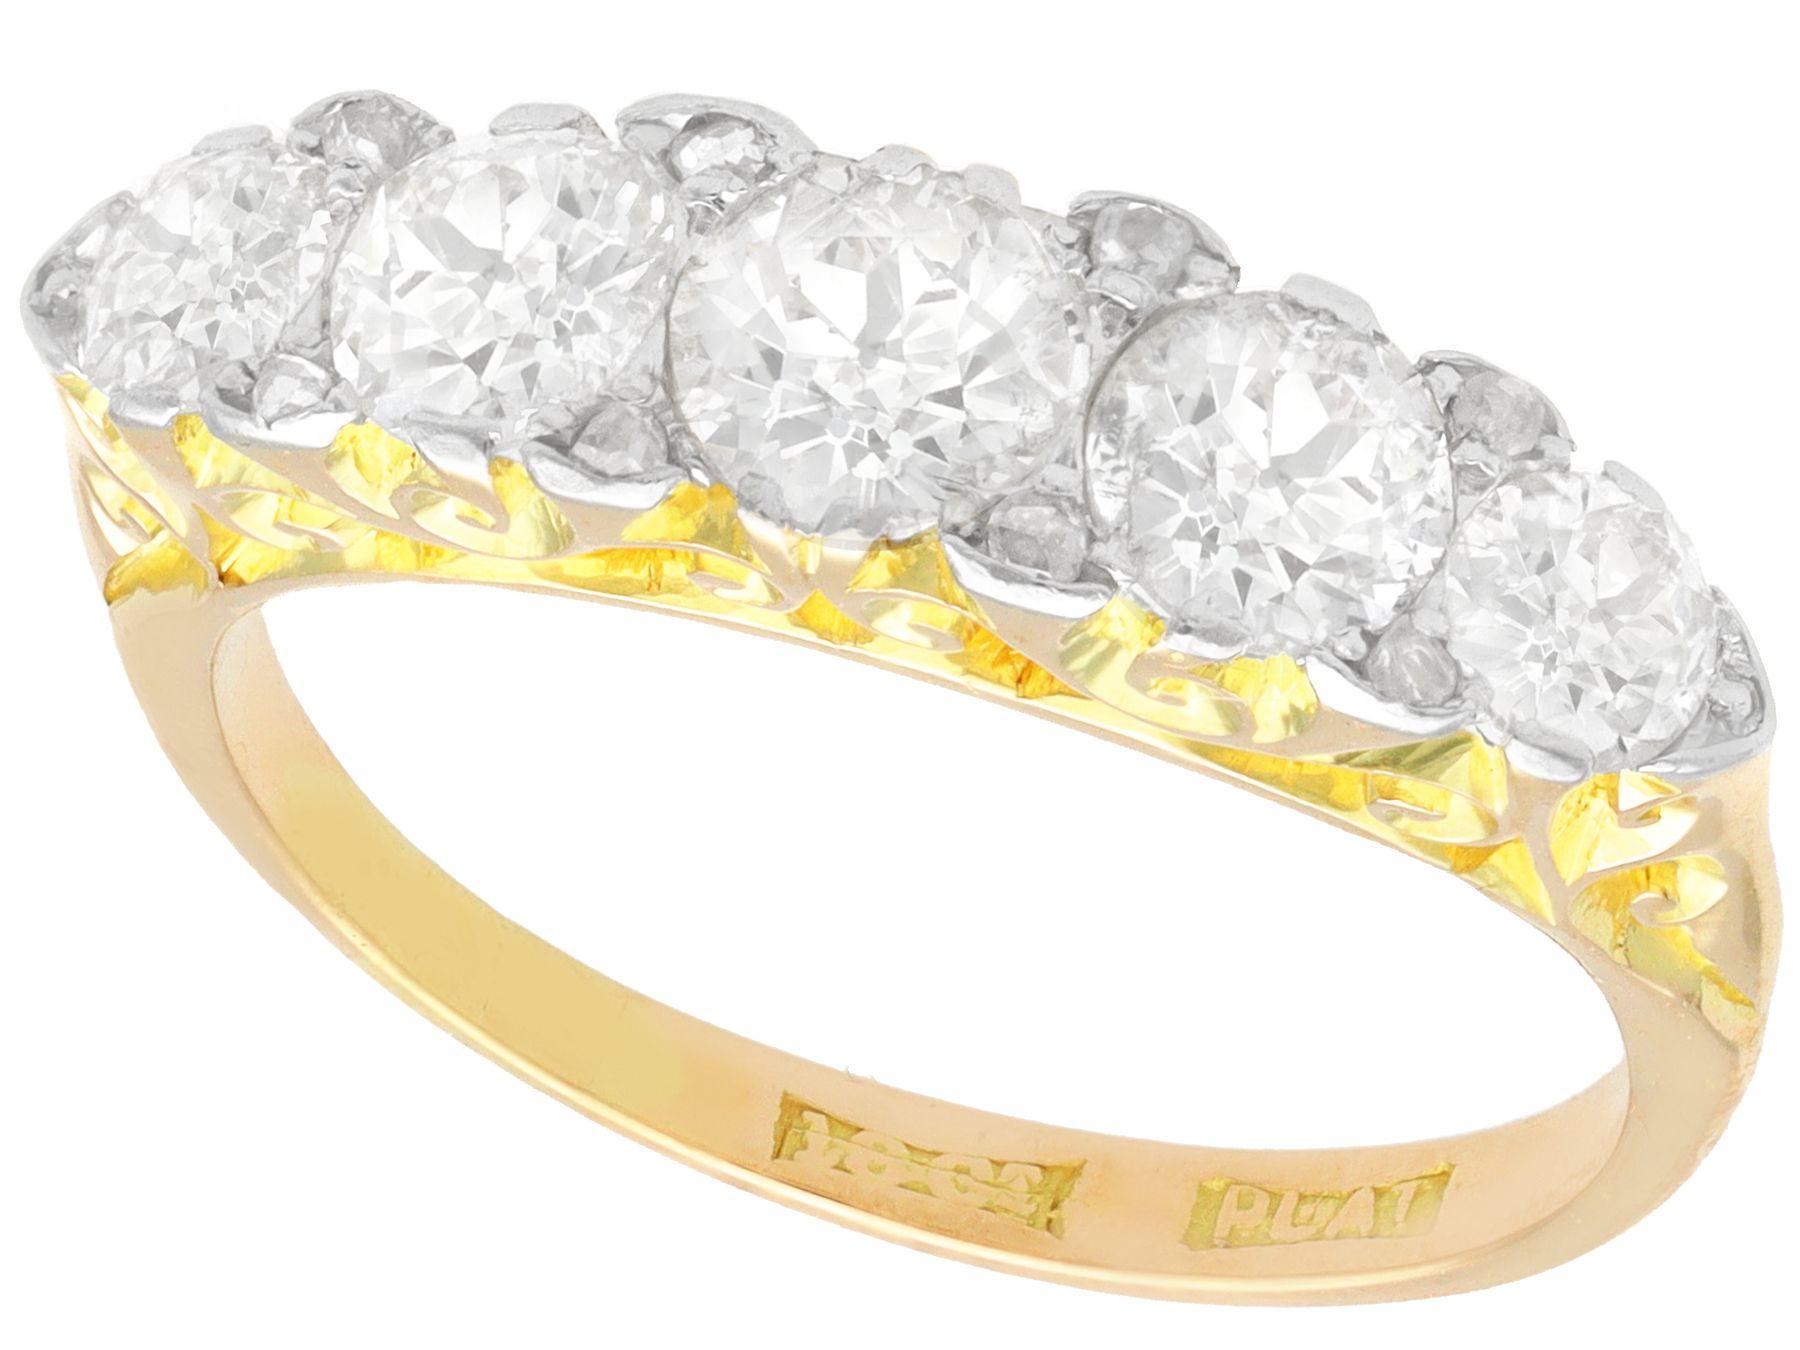 A stunning, fine and impressive 1.83 carat diamond, 18 karat yellow gold and platinum five stone ring; part of our diverse antique jewelry and estate jewelry collections

This fine and impressive gold five stone diamond ring has been crafted in 18k